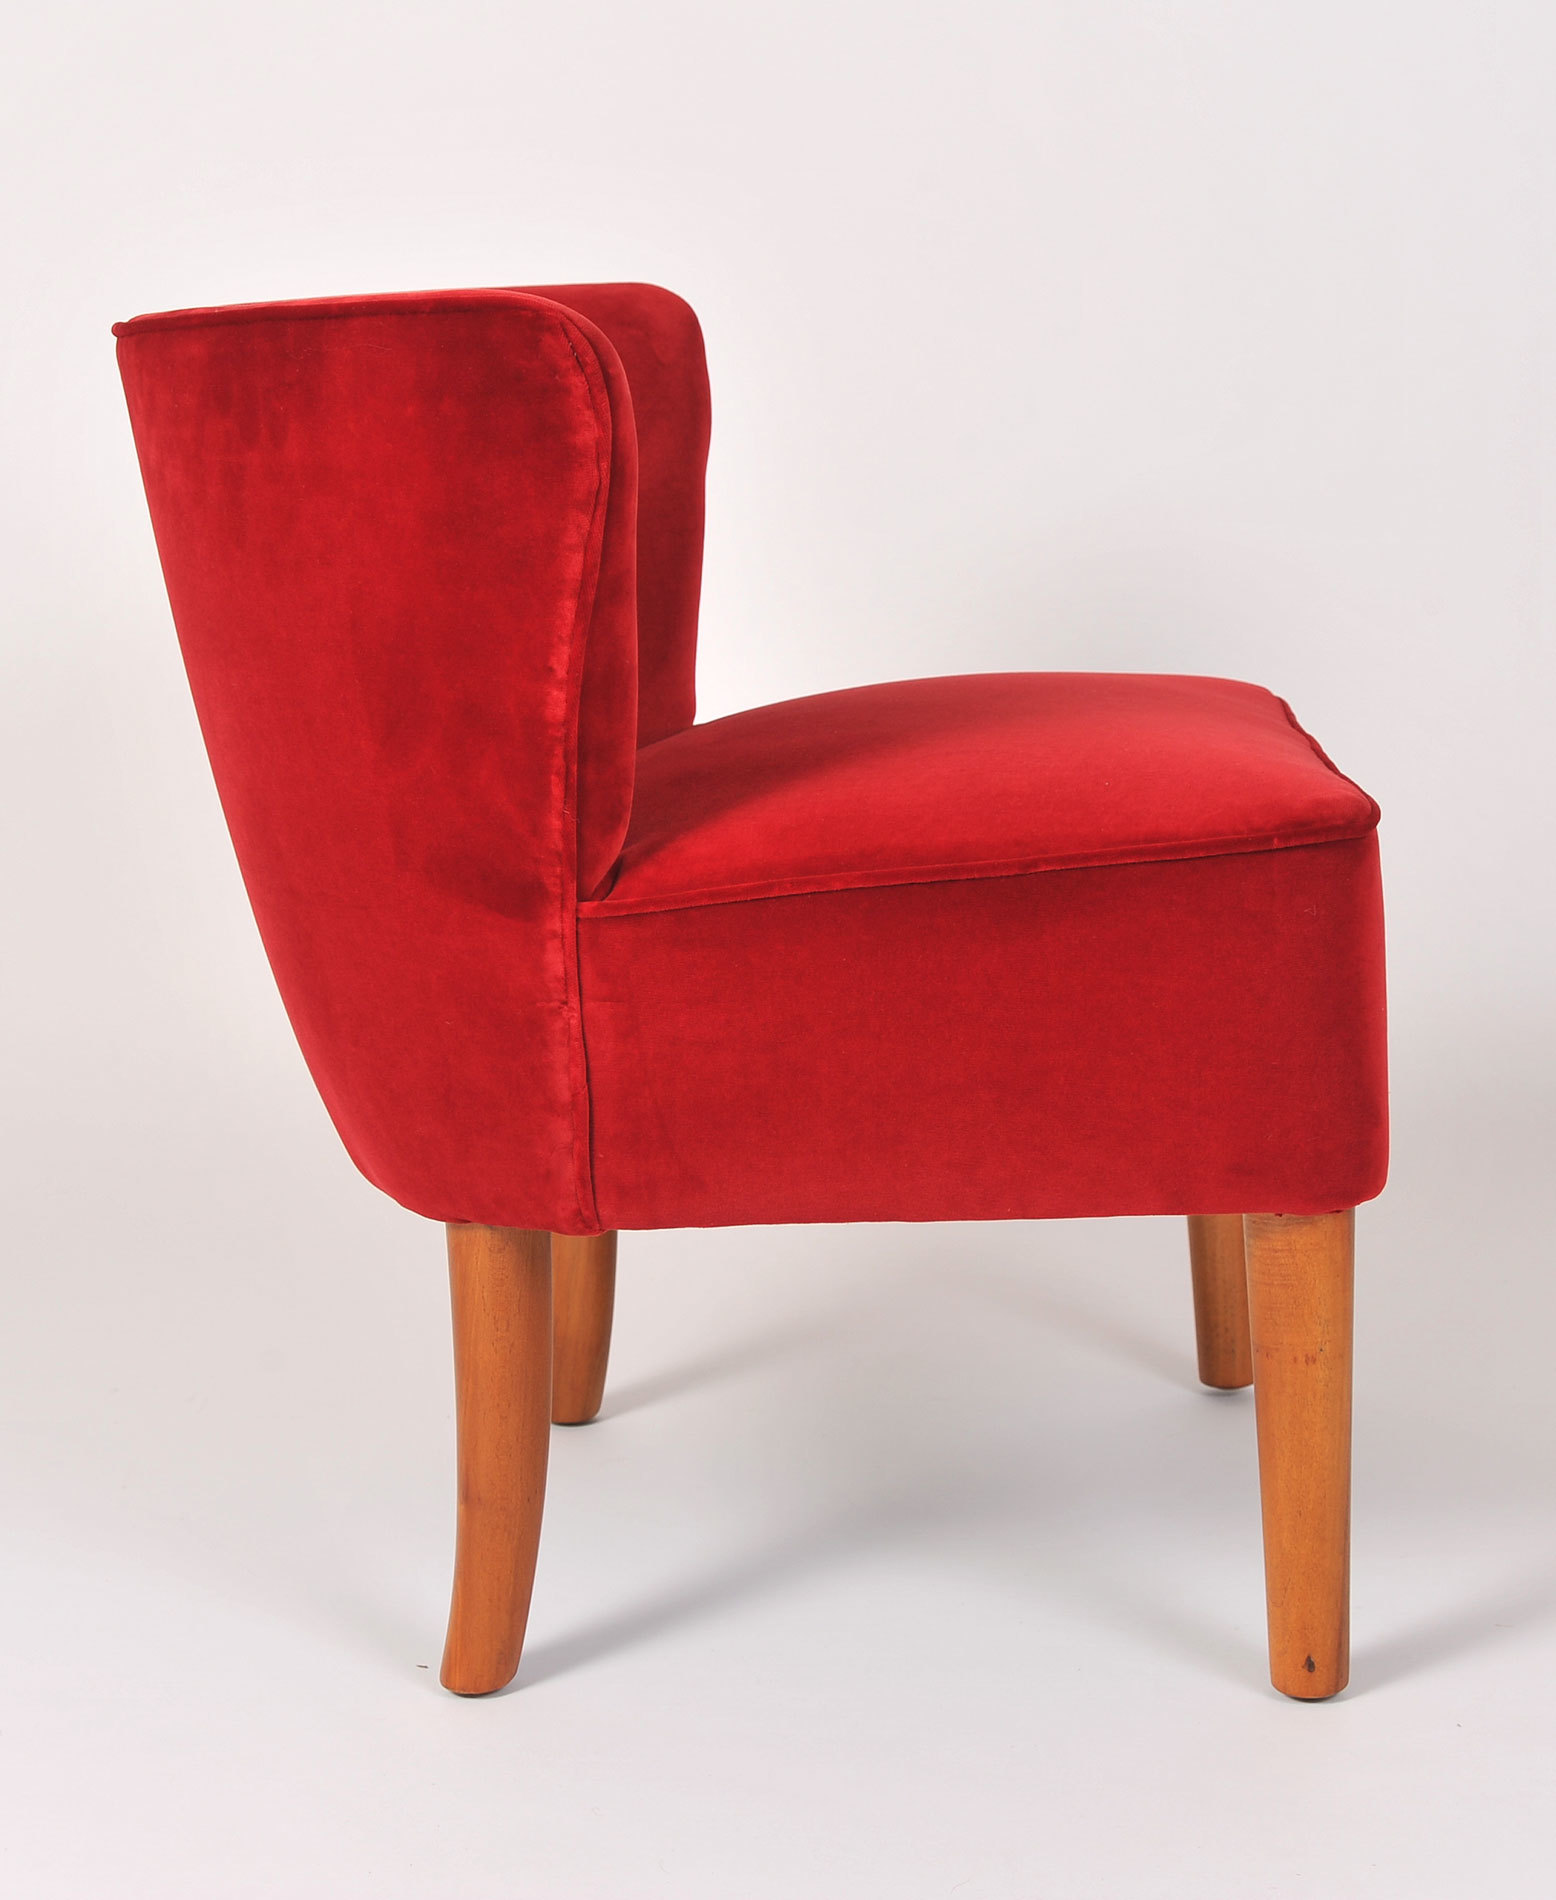 The image for Pair Red Velvet Chairs 04